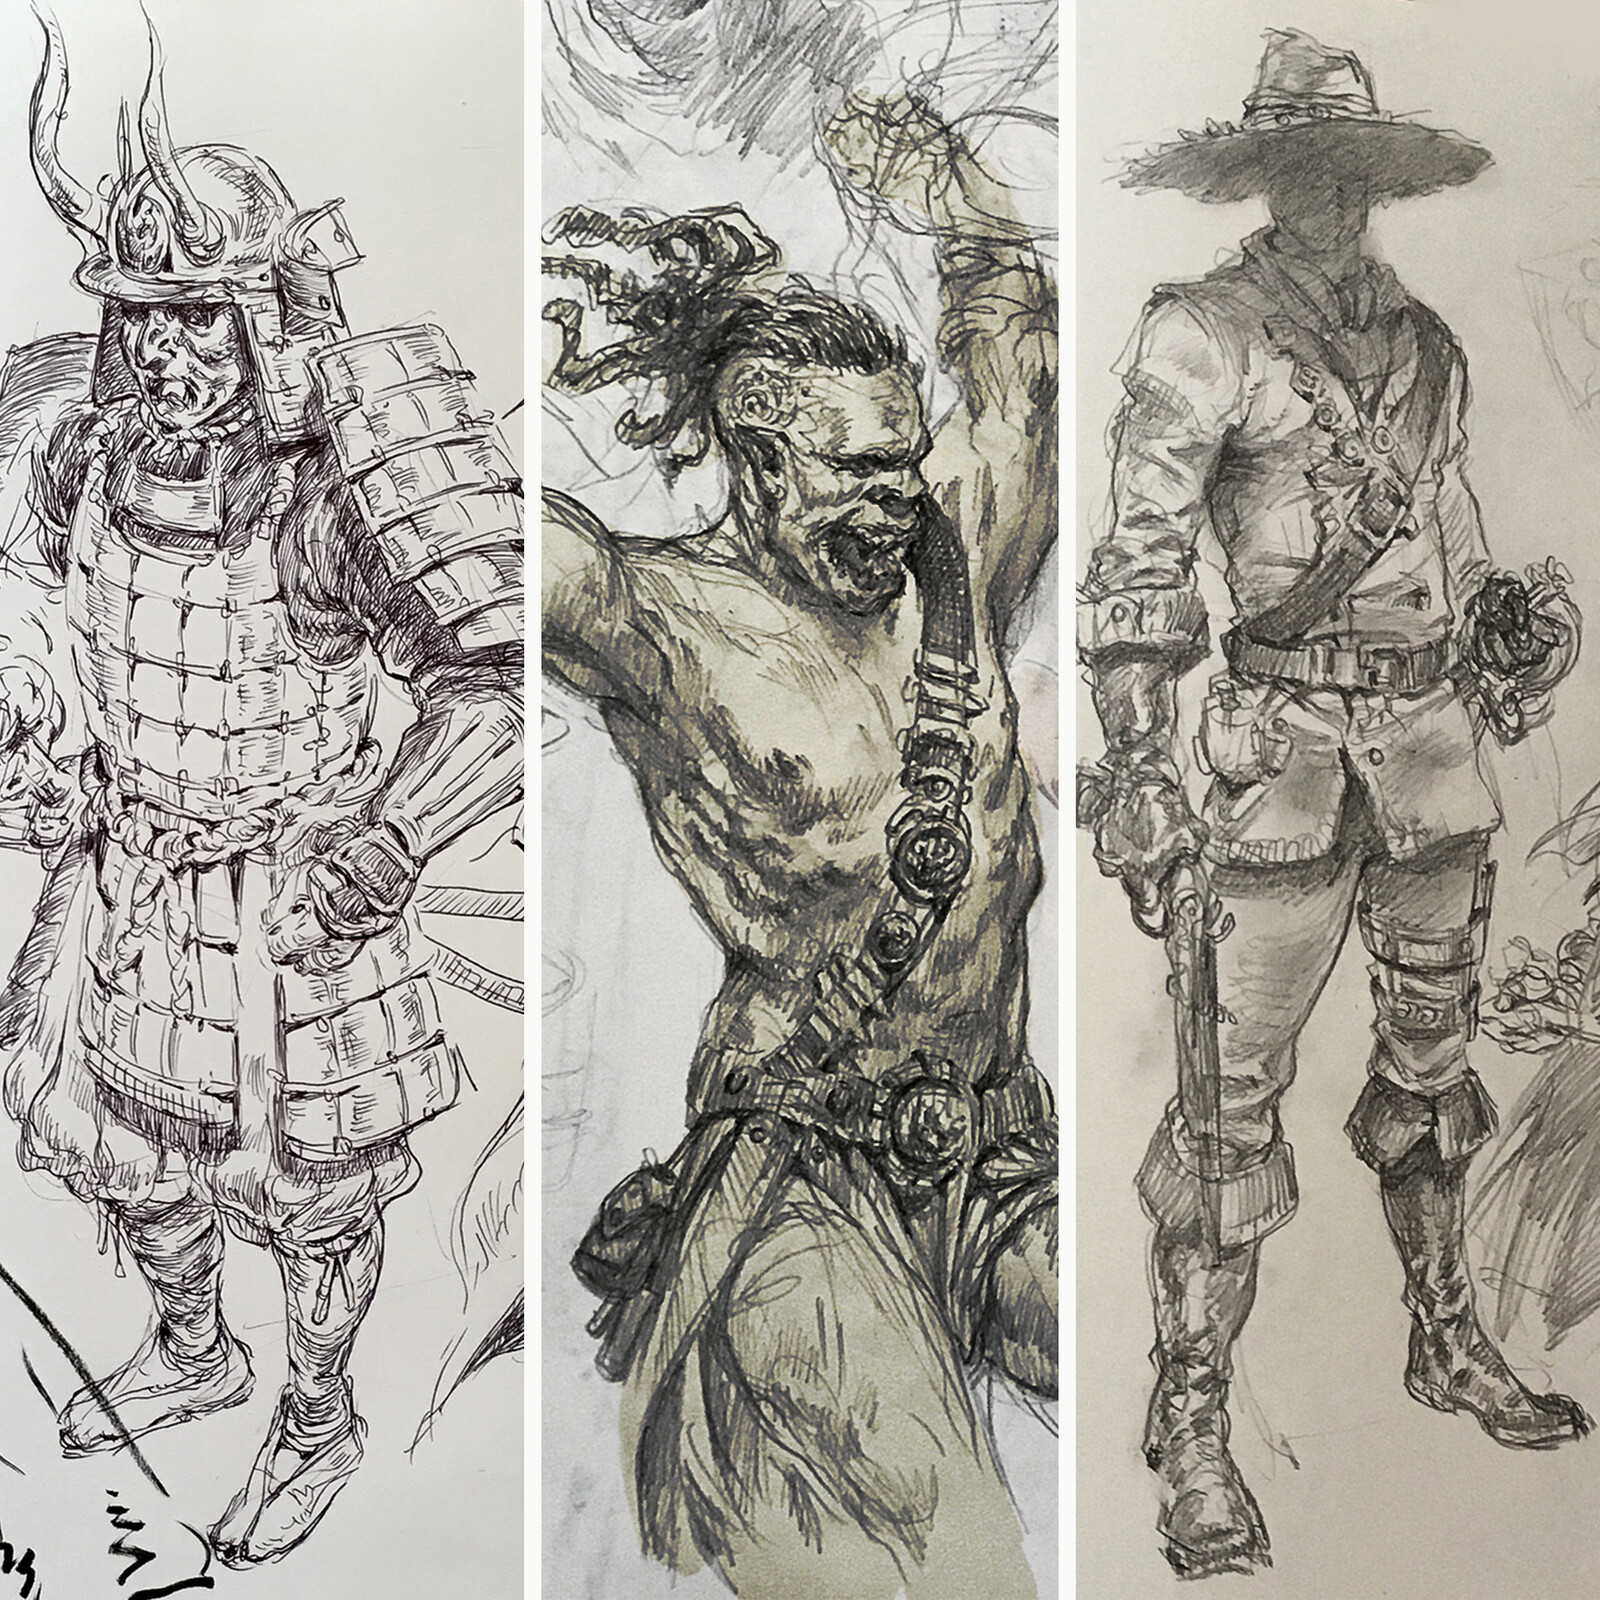 Sketchbook: March-May 2019